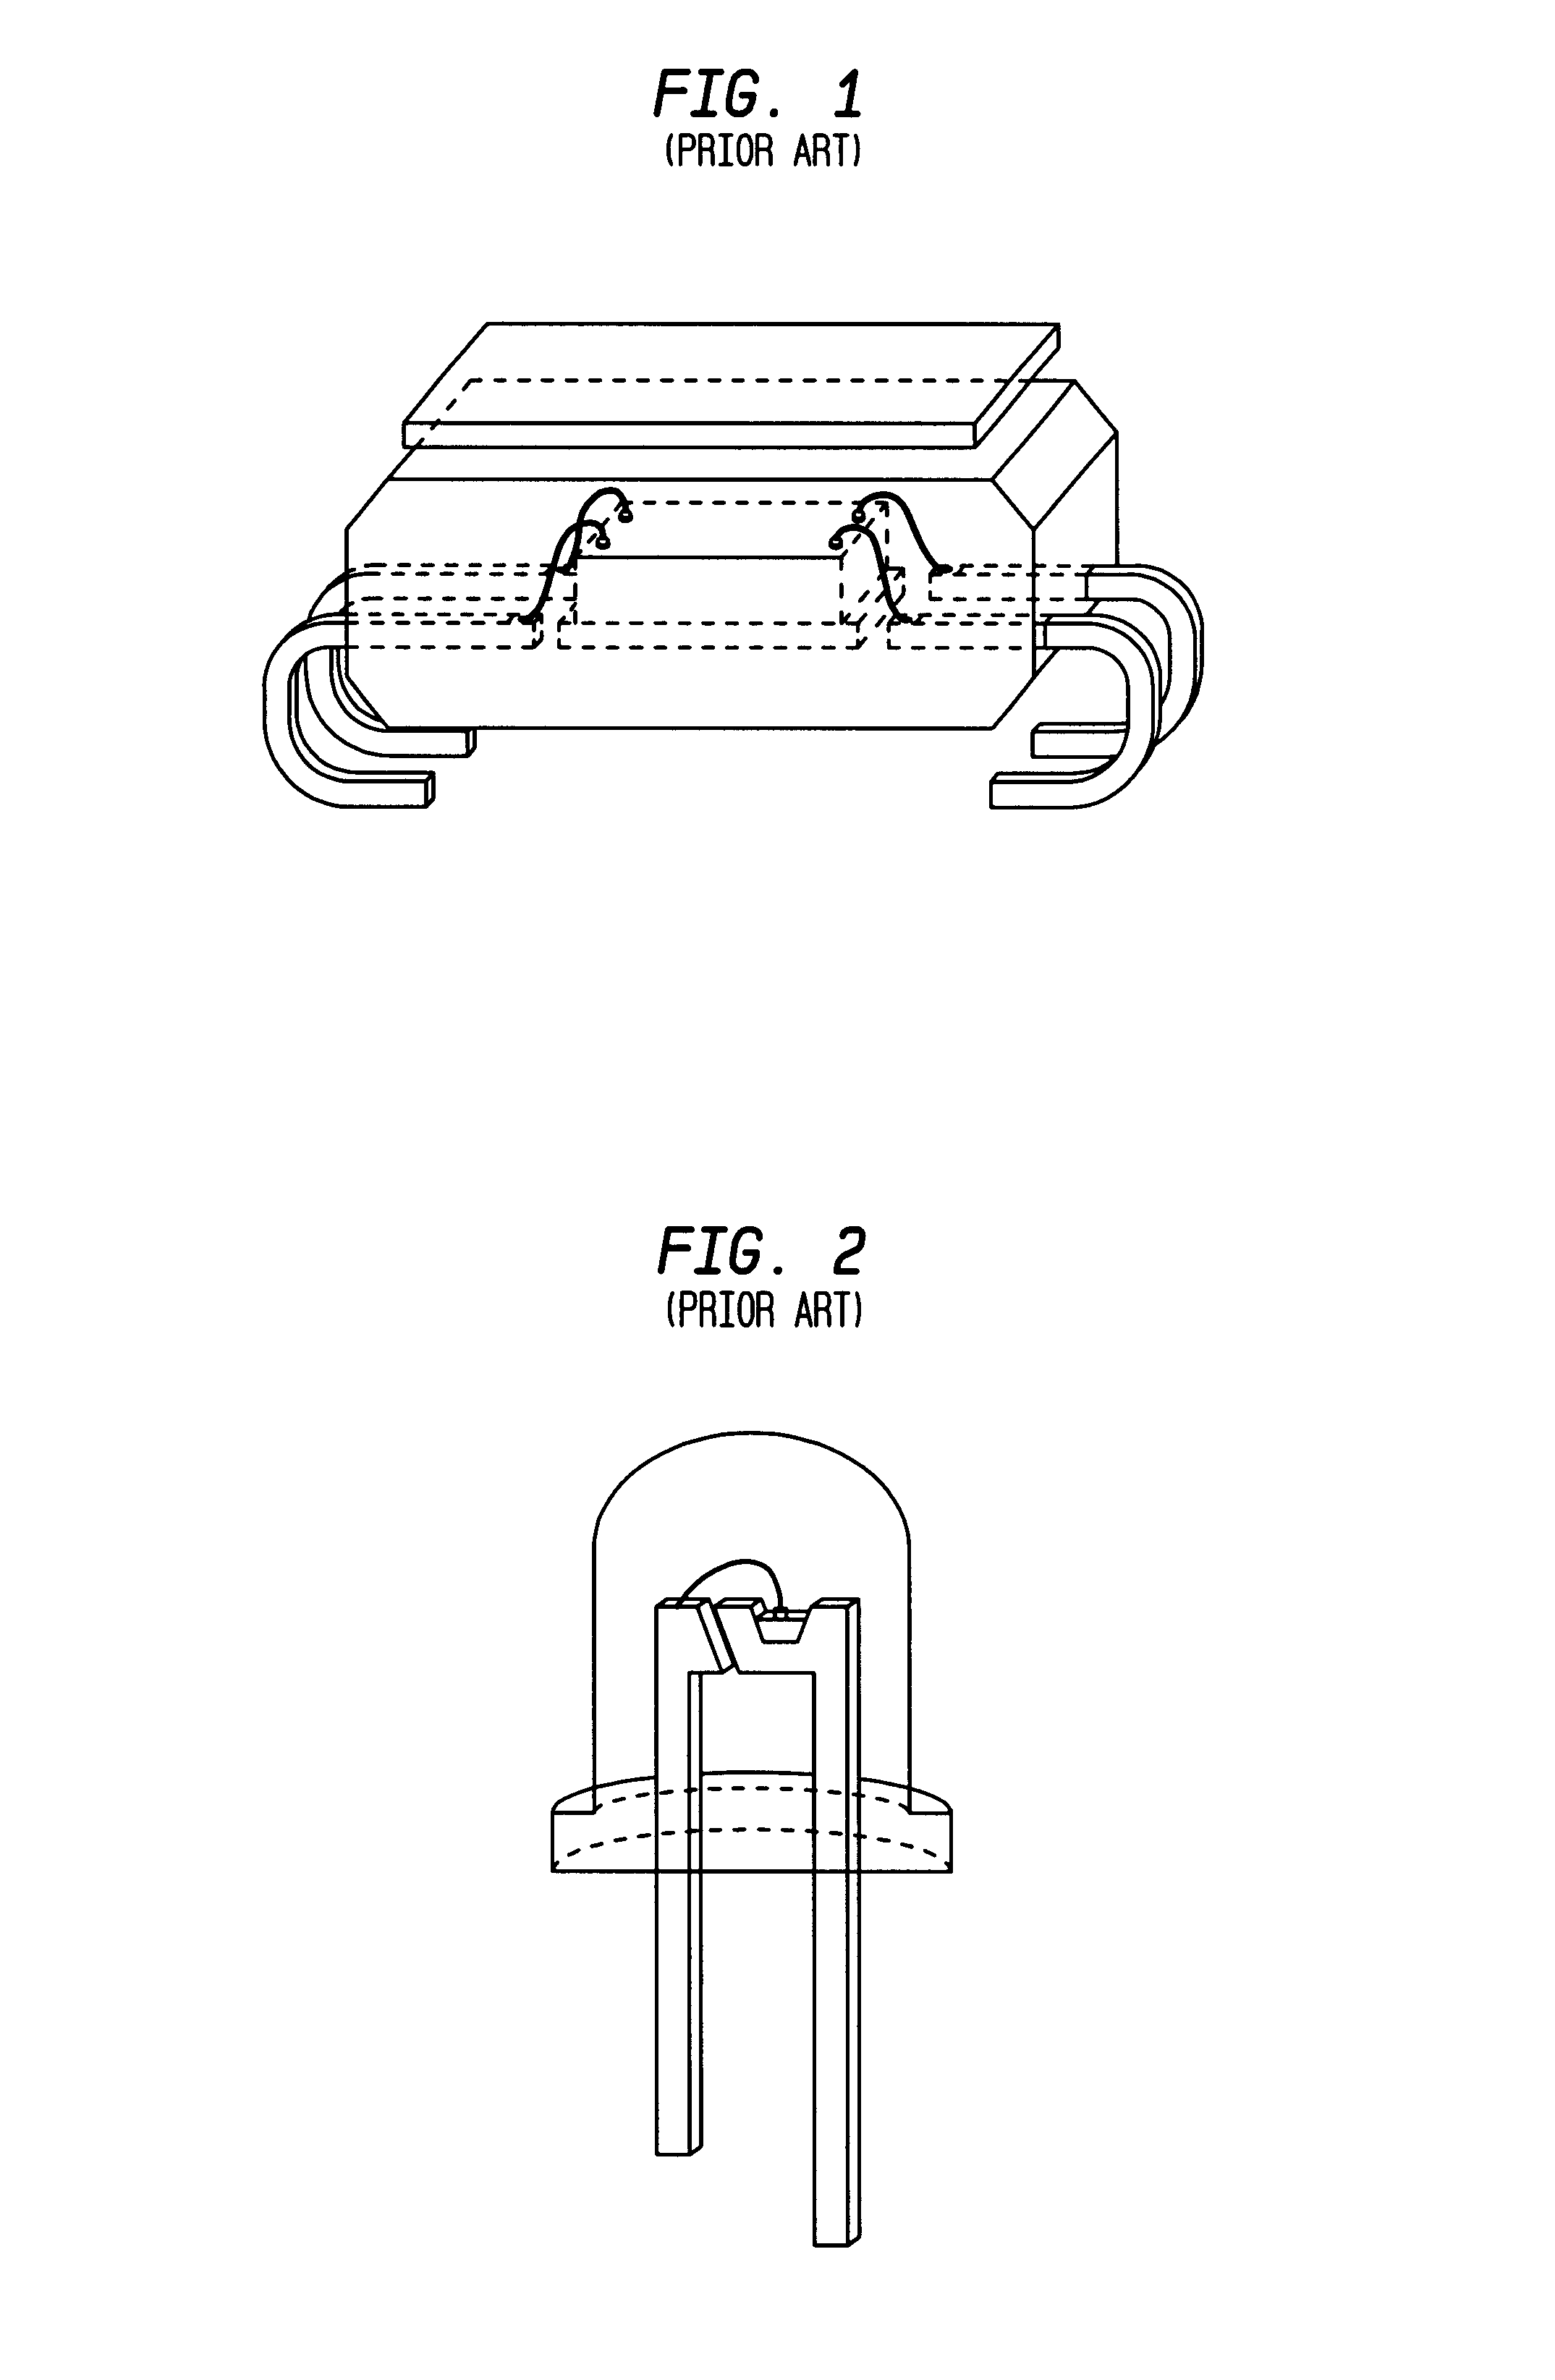 Semiconductor packages having light-sensitive chips